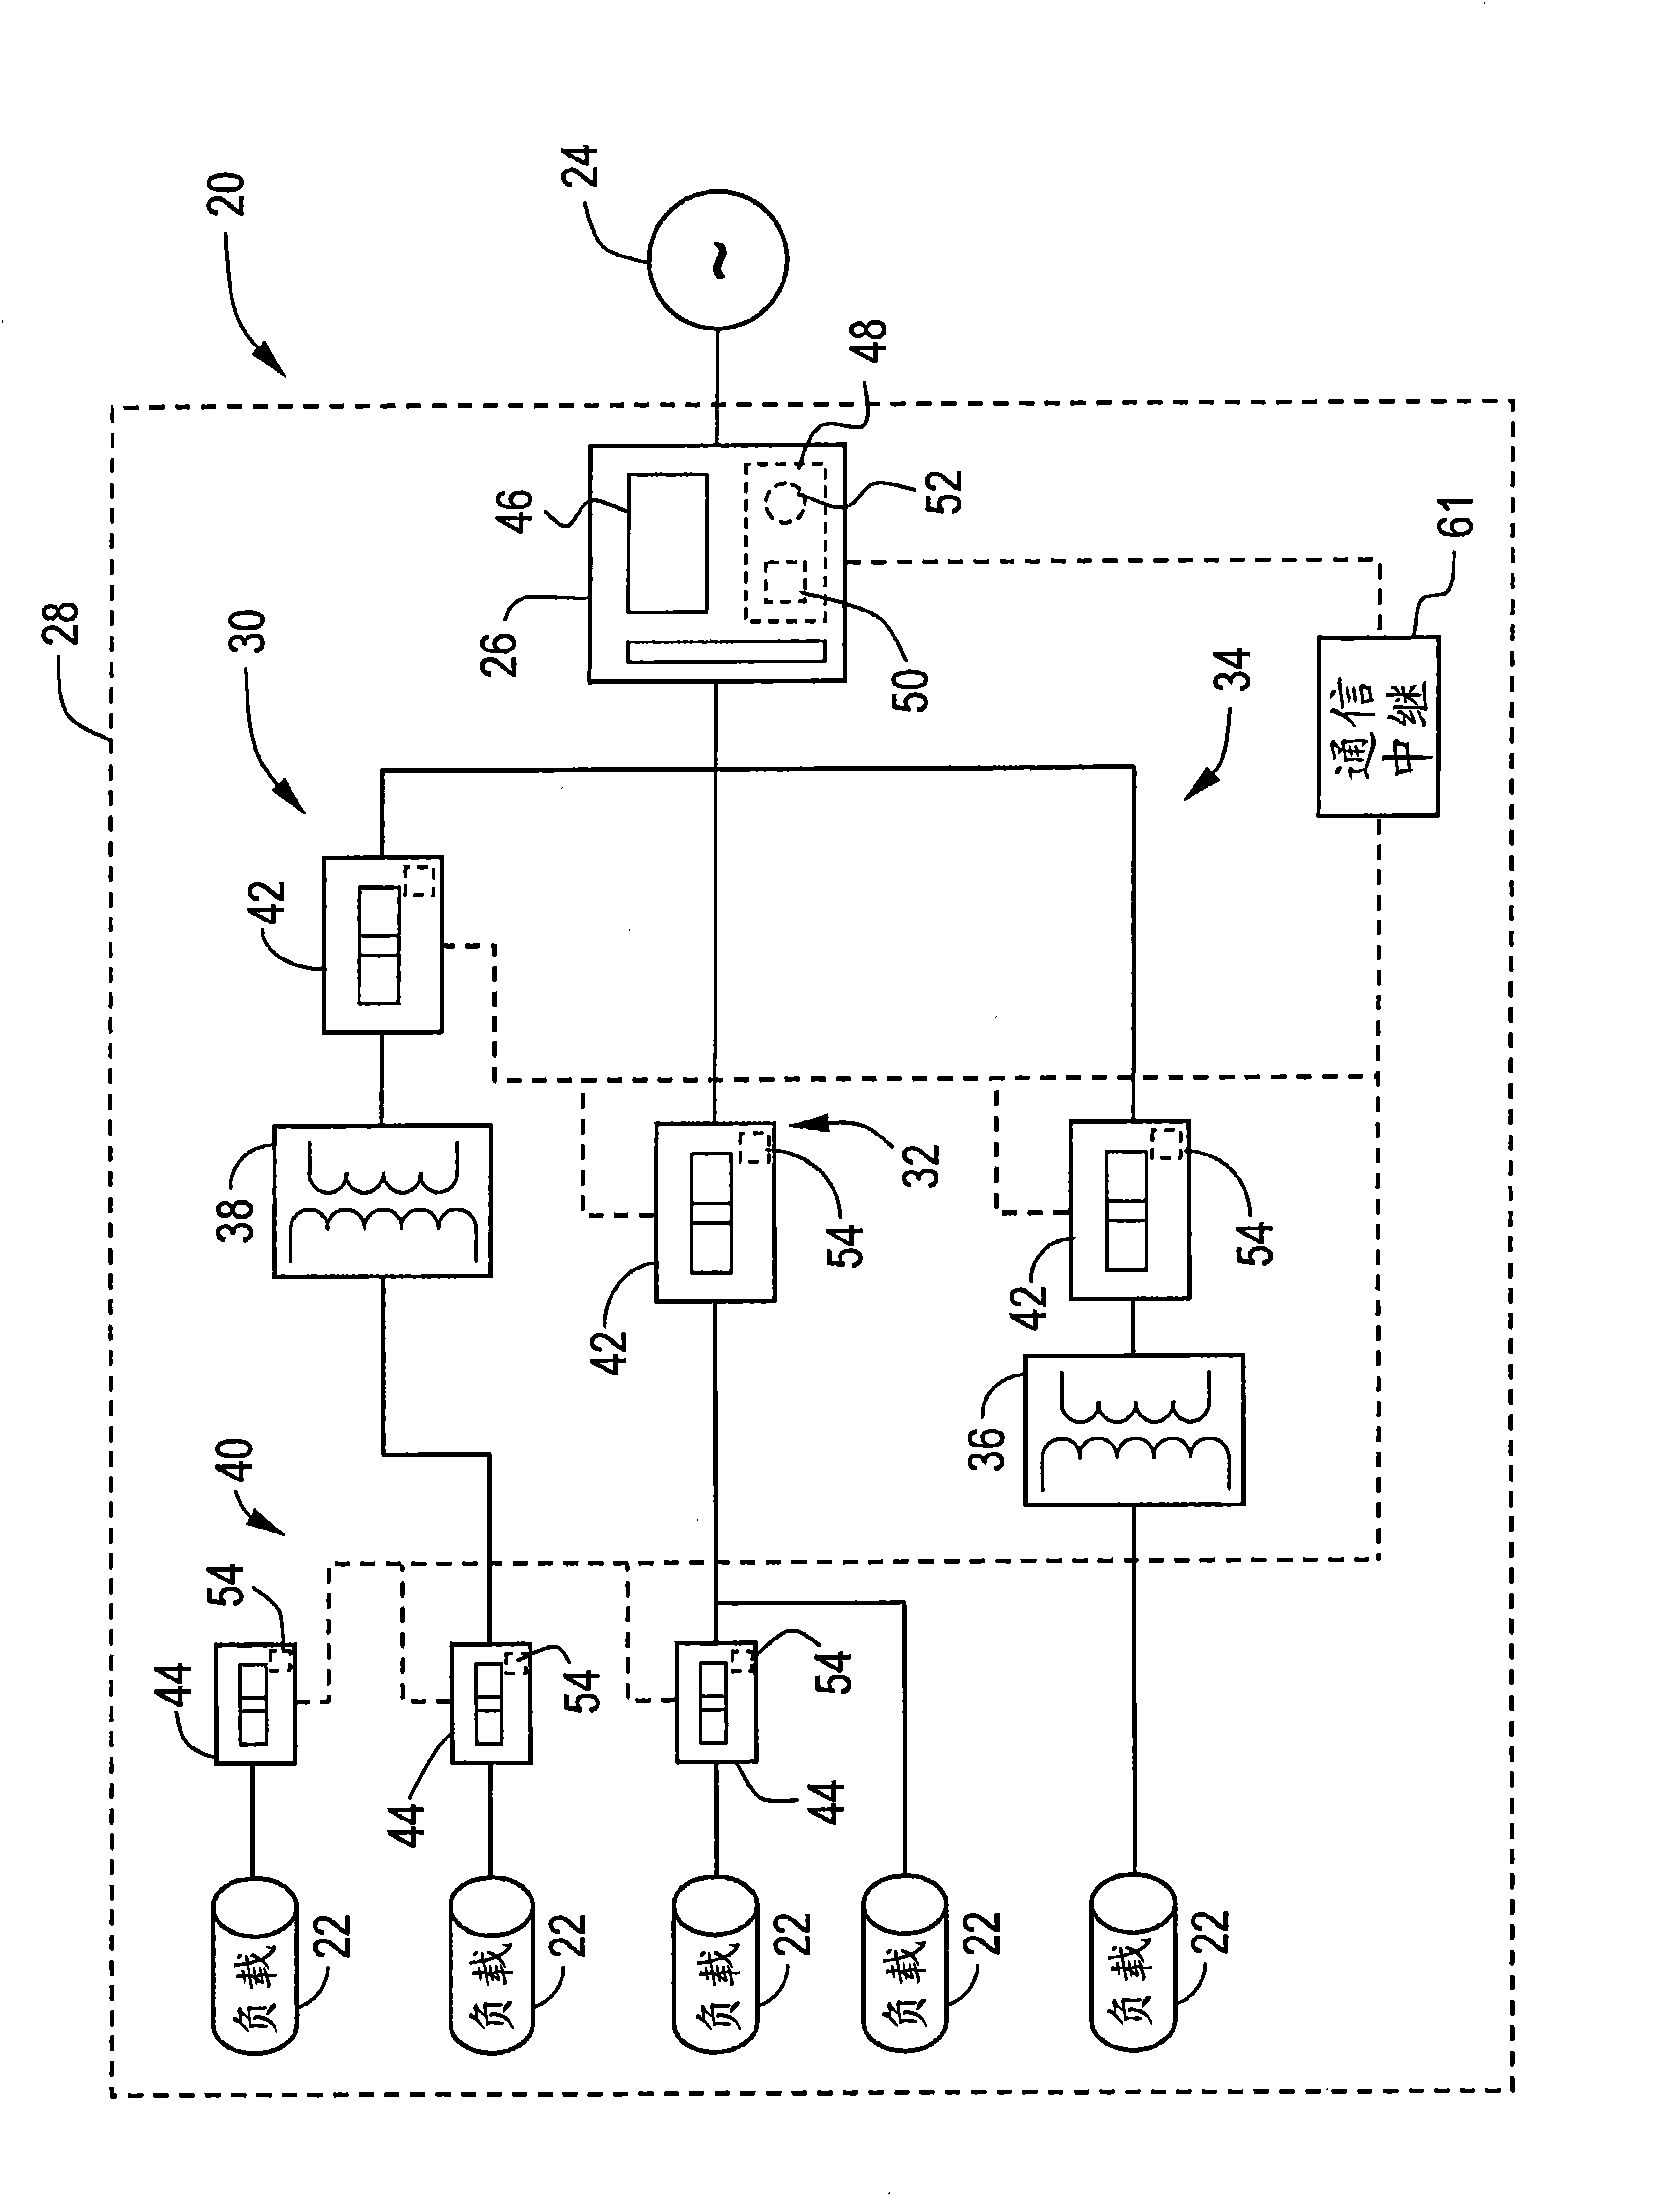 Circuit breaker having seperate restrained and unrestrained zone selective interlock setting capability